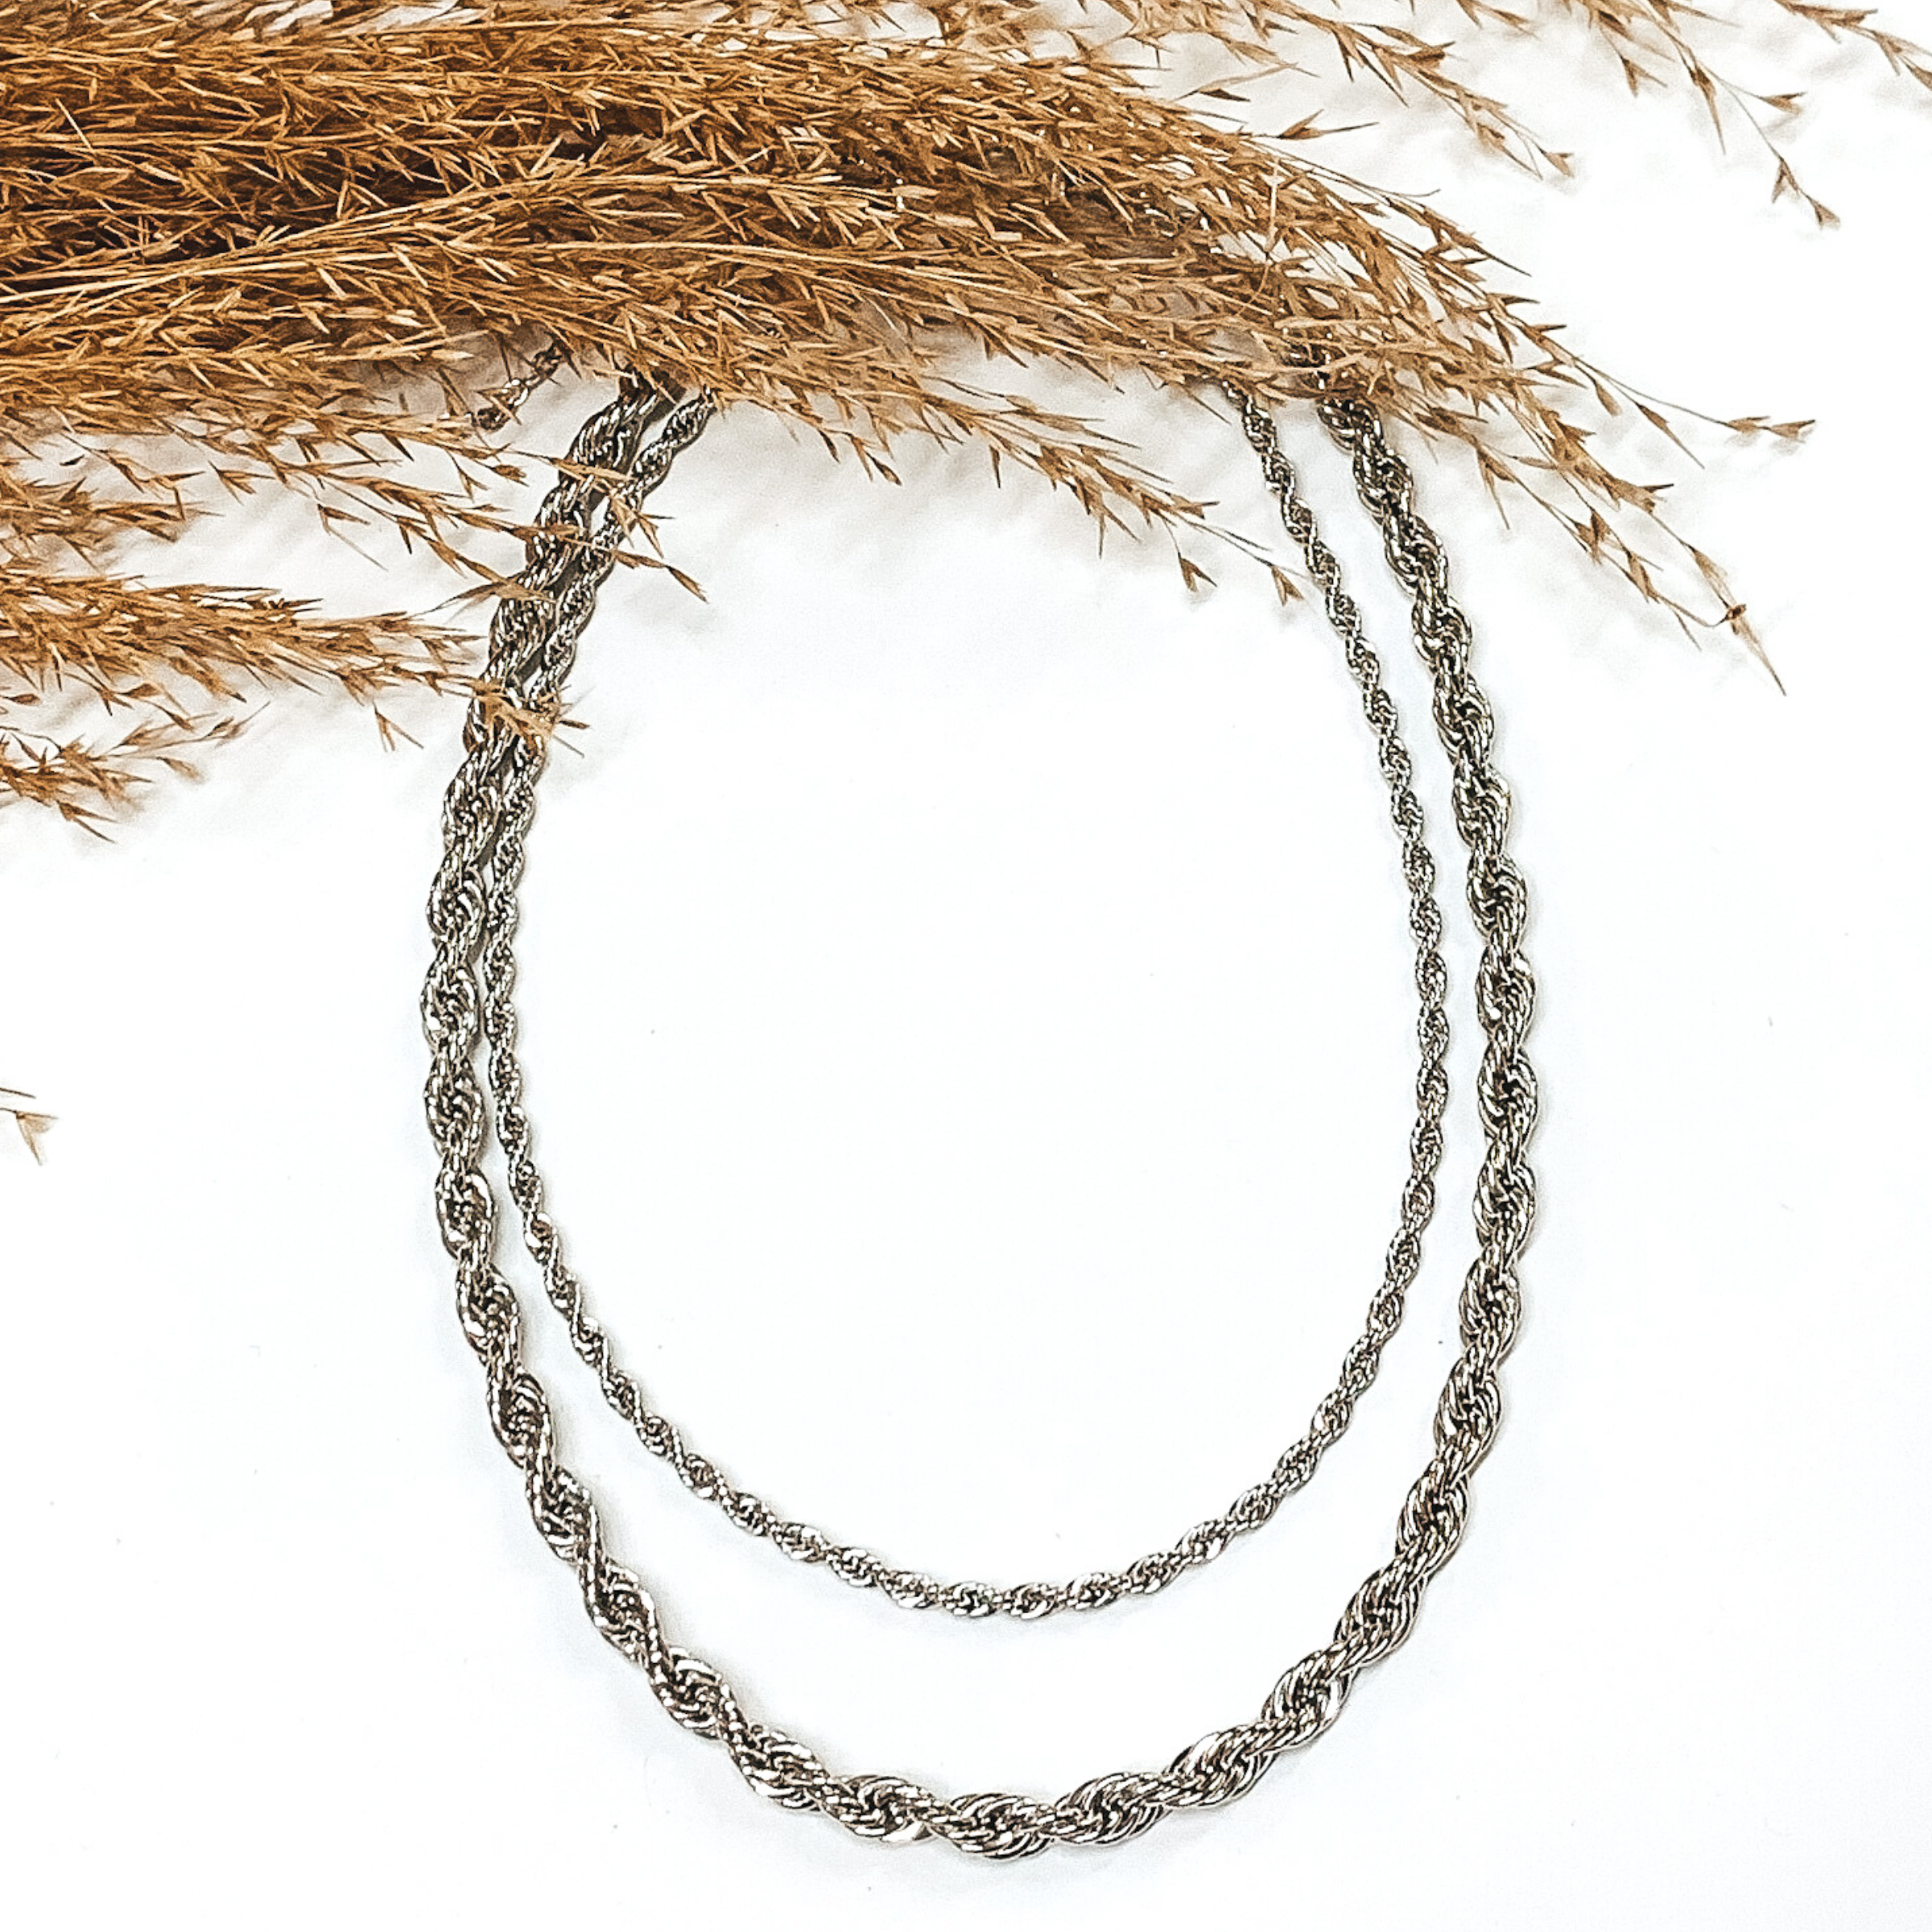 Double layered silver rope chain necklace. This necklace is pictured on a white background with tan floral at the top of the picture.